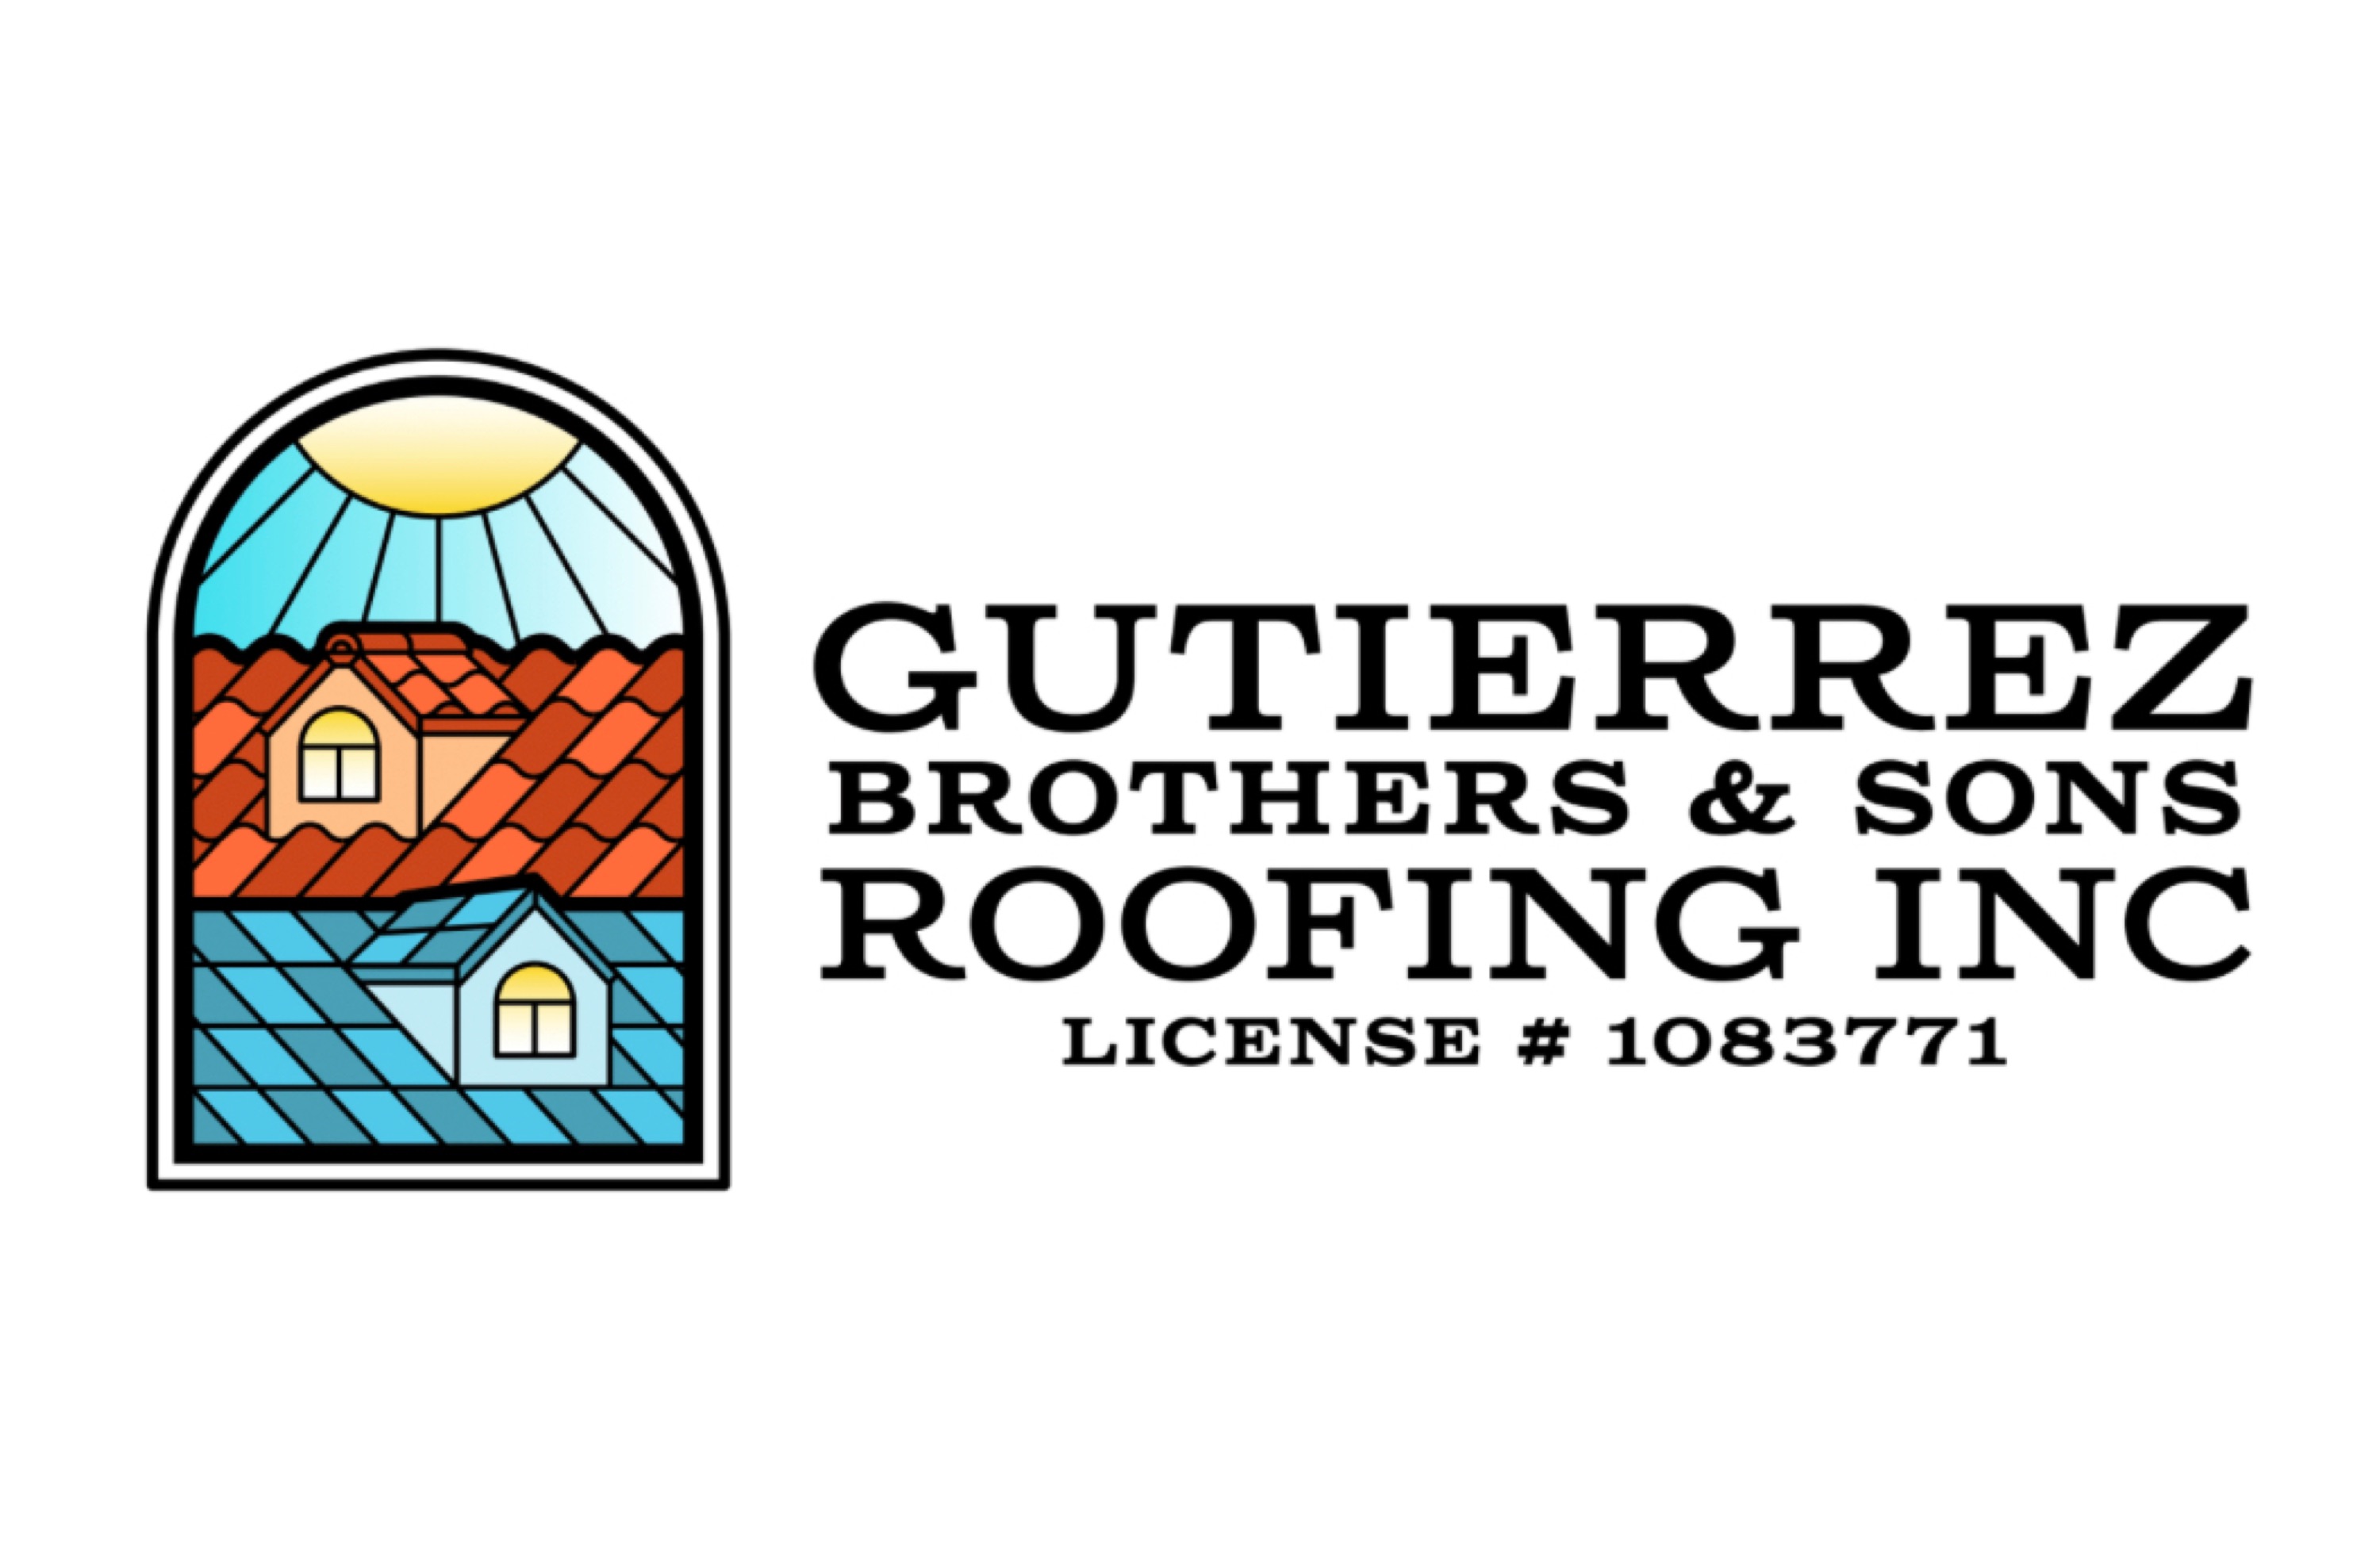 Gutierrez Brothers & Sons Roofing, Inc. Logo